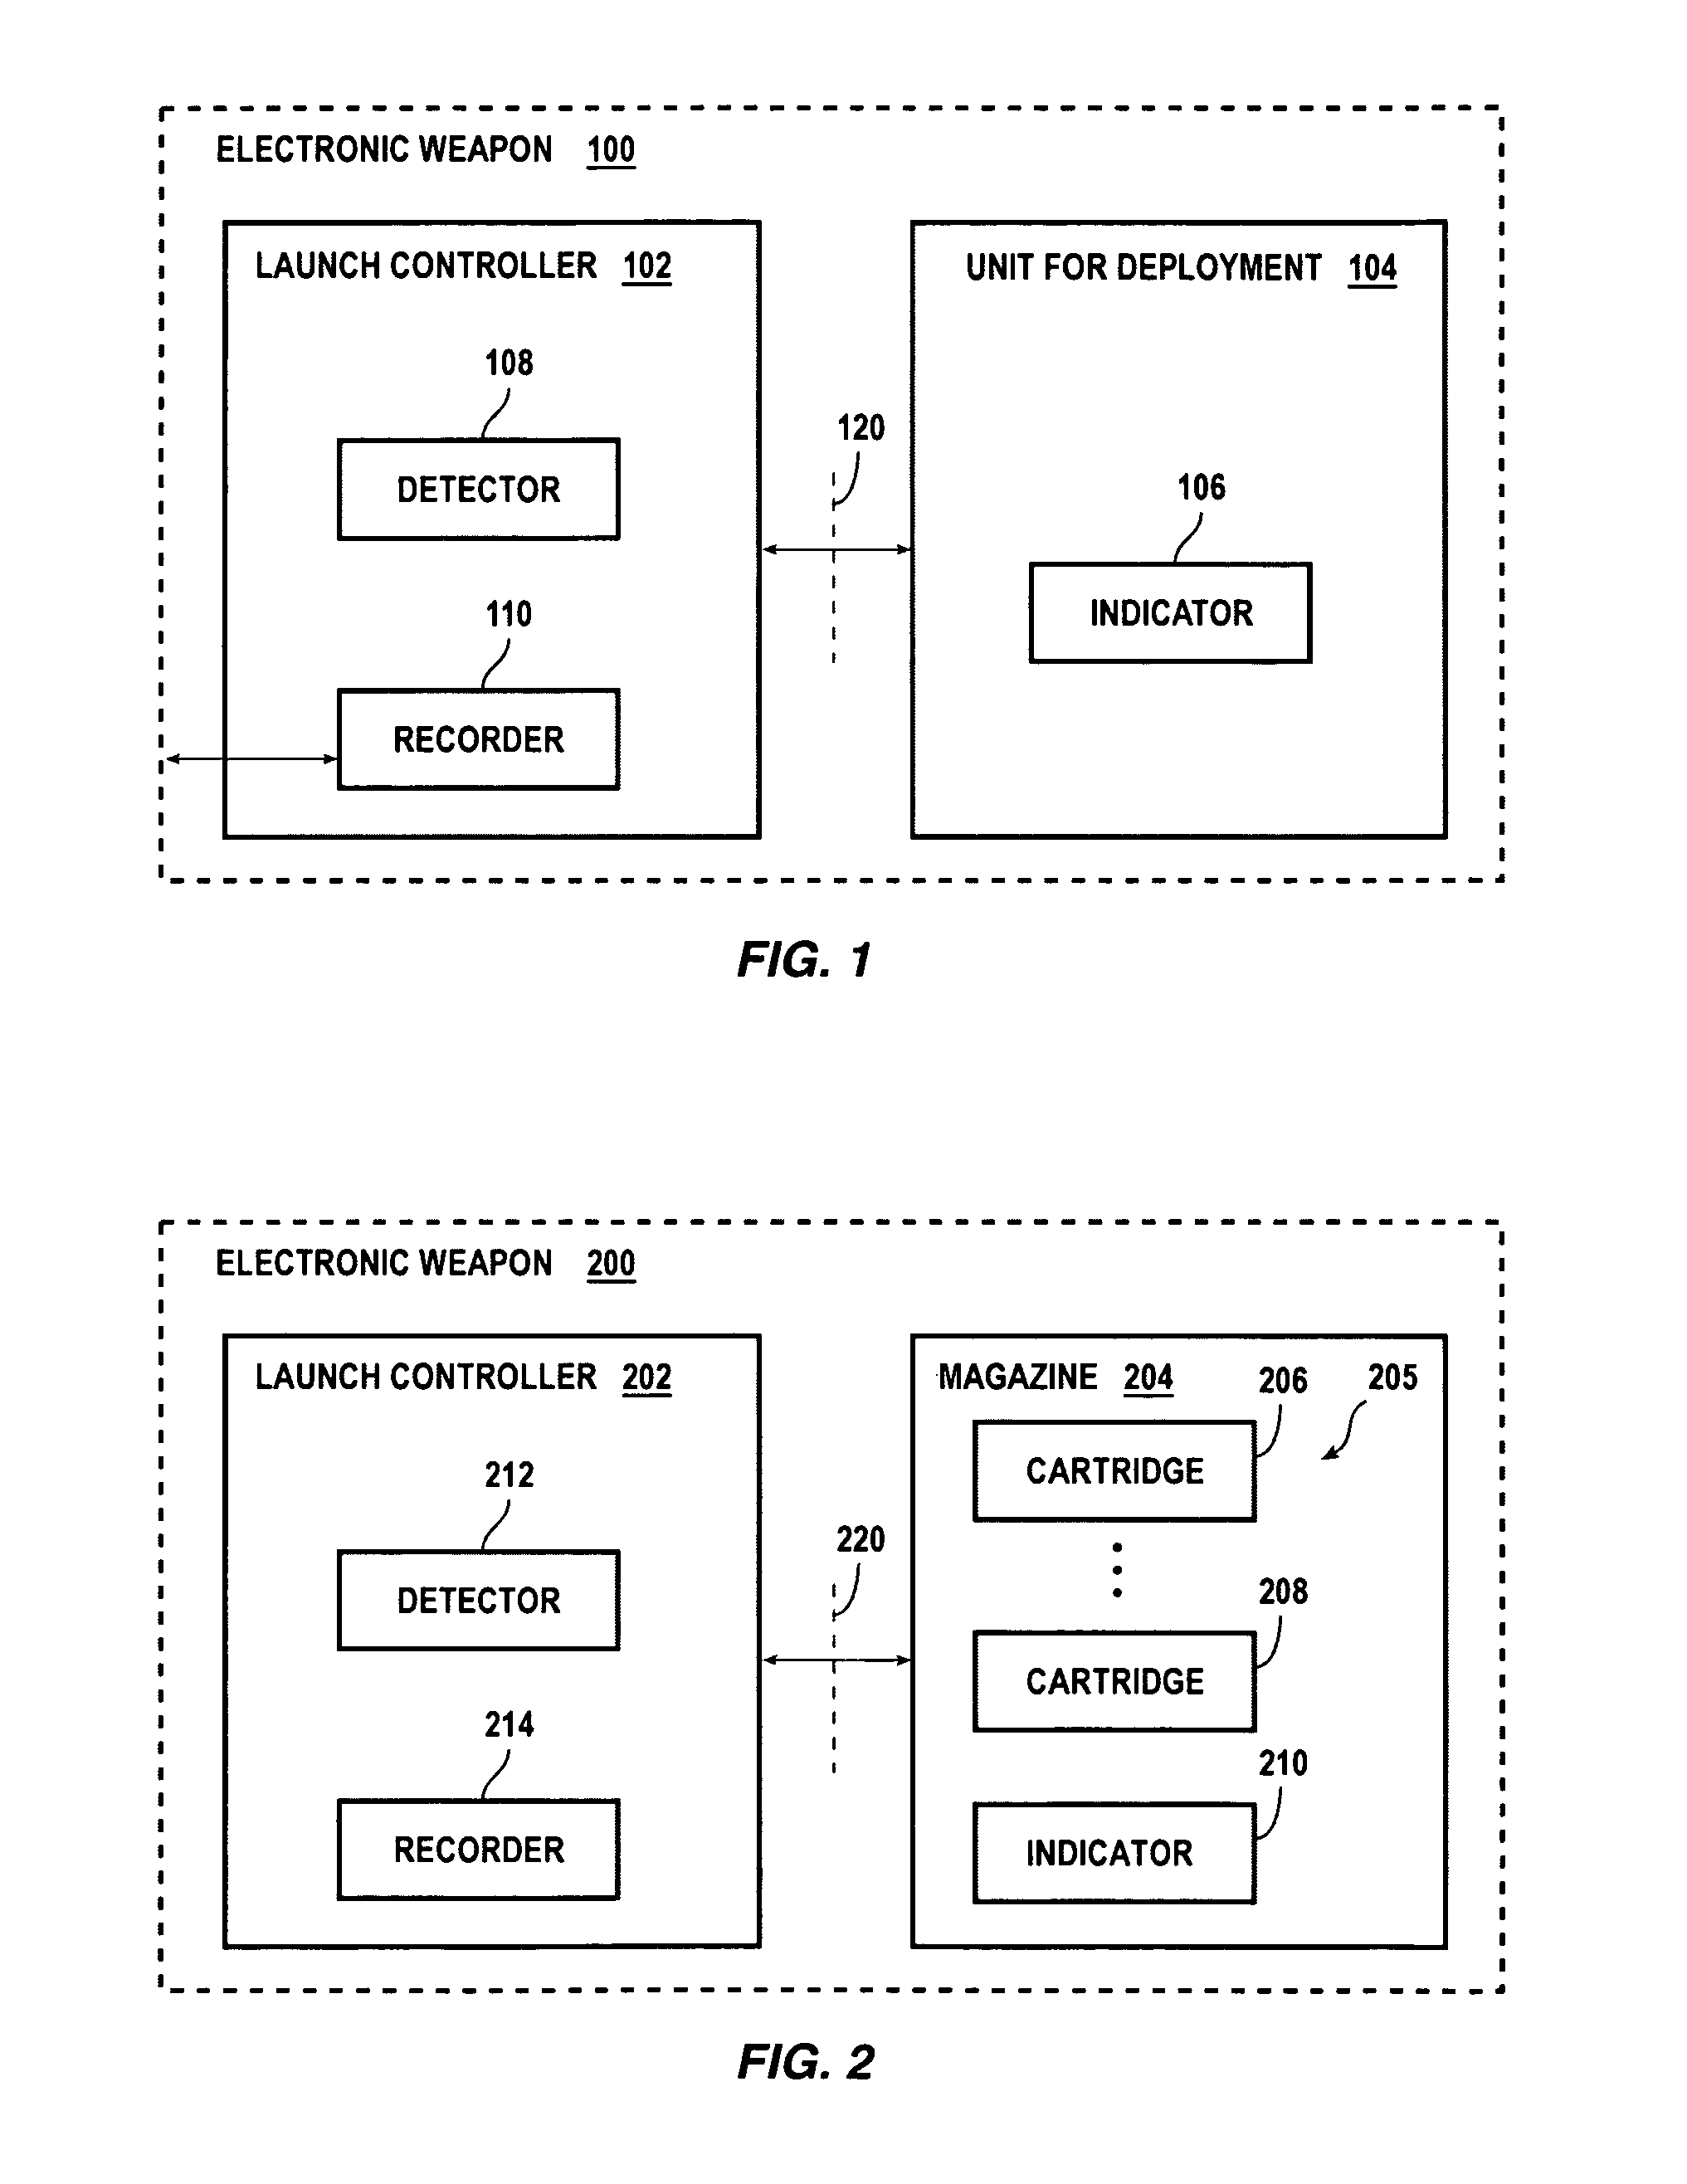 Systems and methods for indicating properties of a unit for deployment for electronic weaponry